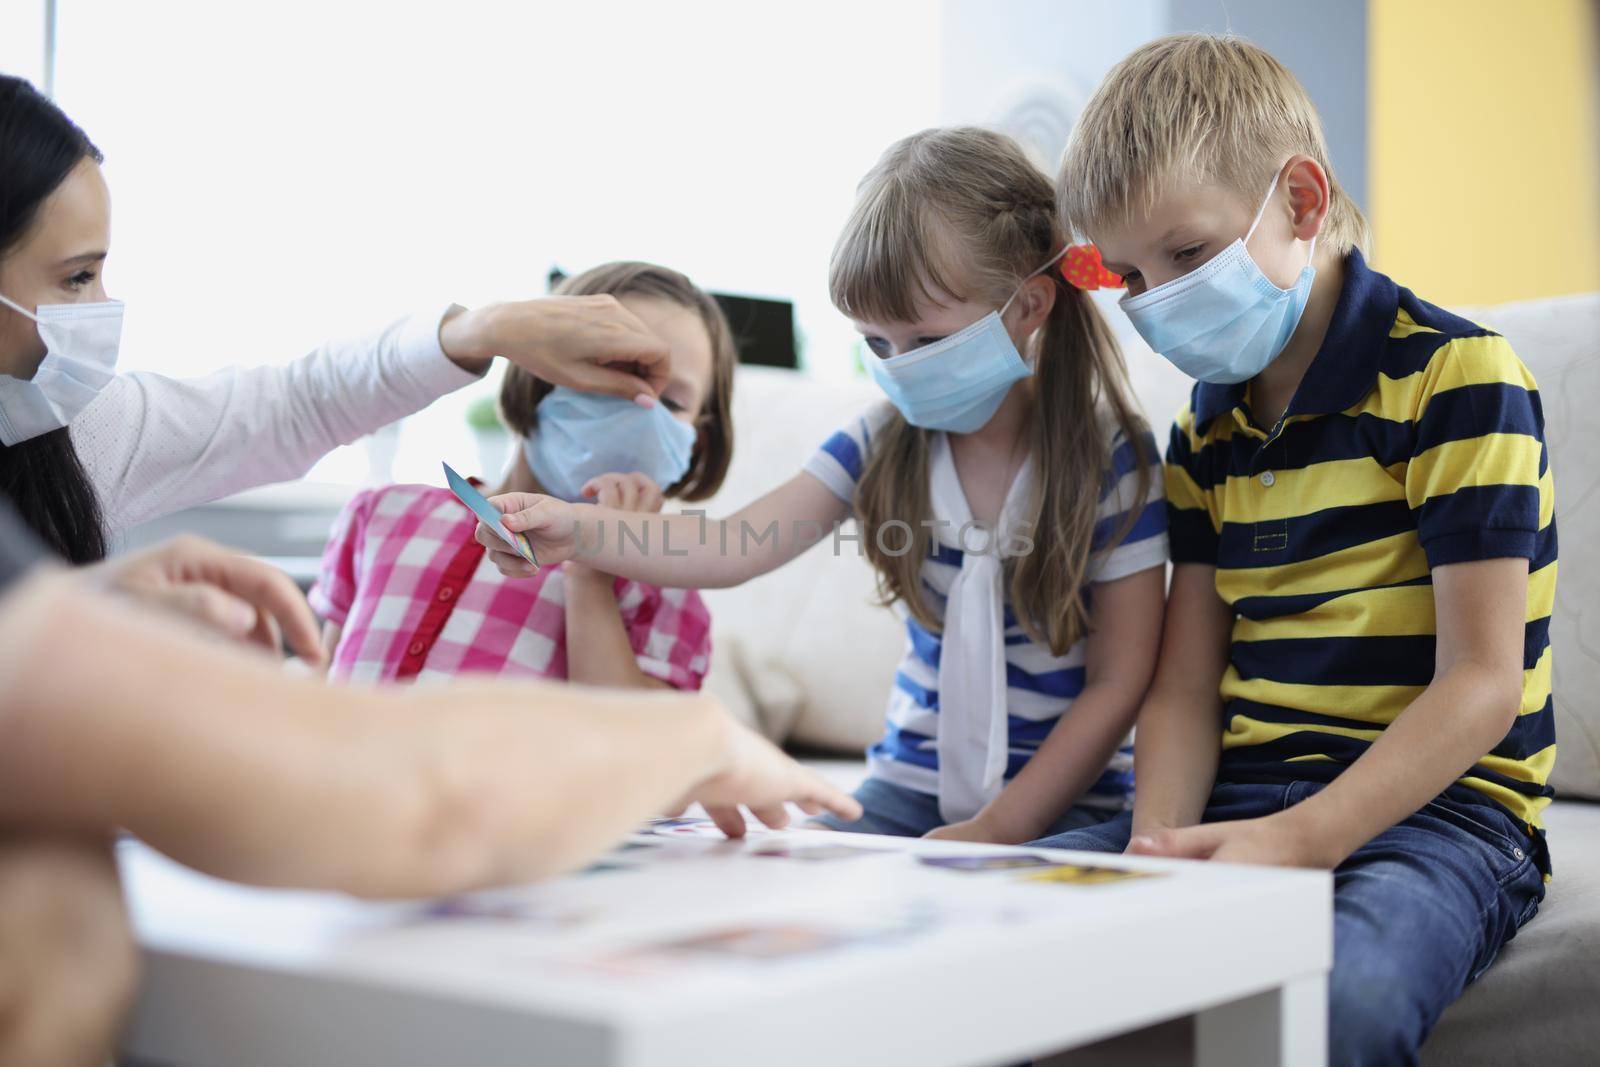 Woman keep checking on kids health, ask to wear face mask, prevent covid spread by kuprevich